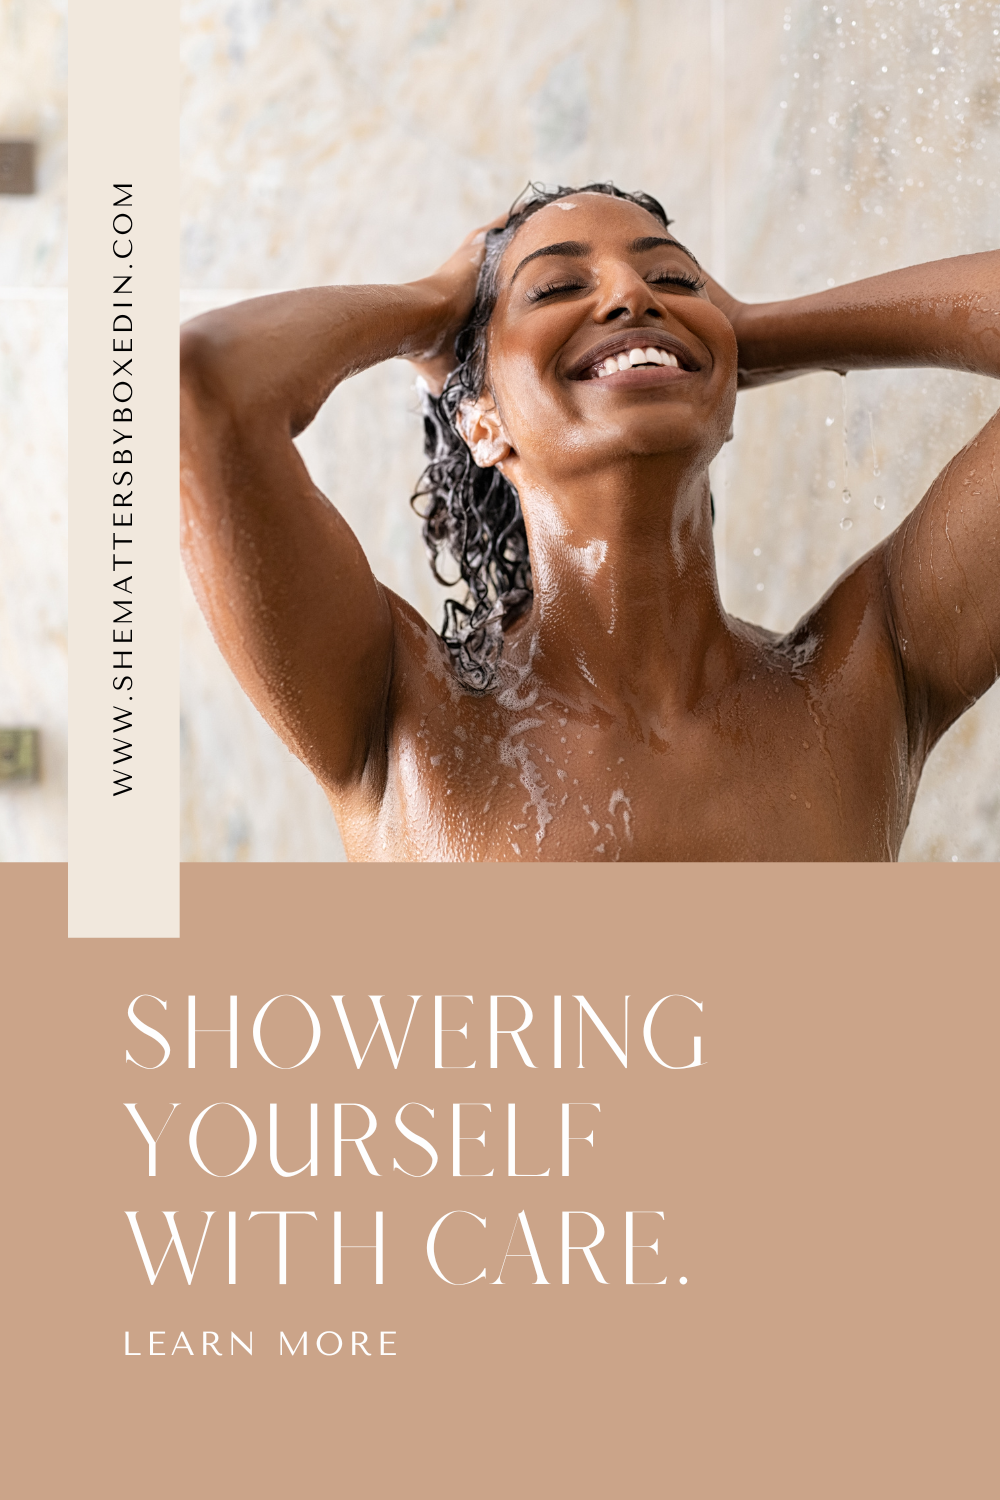 SHOWERING YOURSELF WITH CARE.